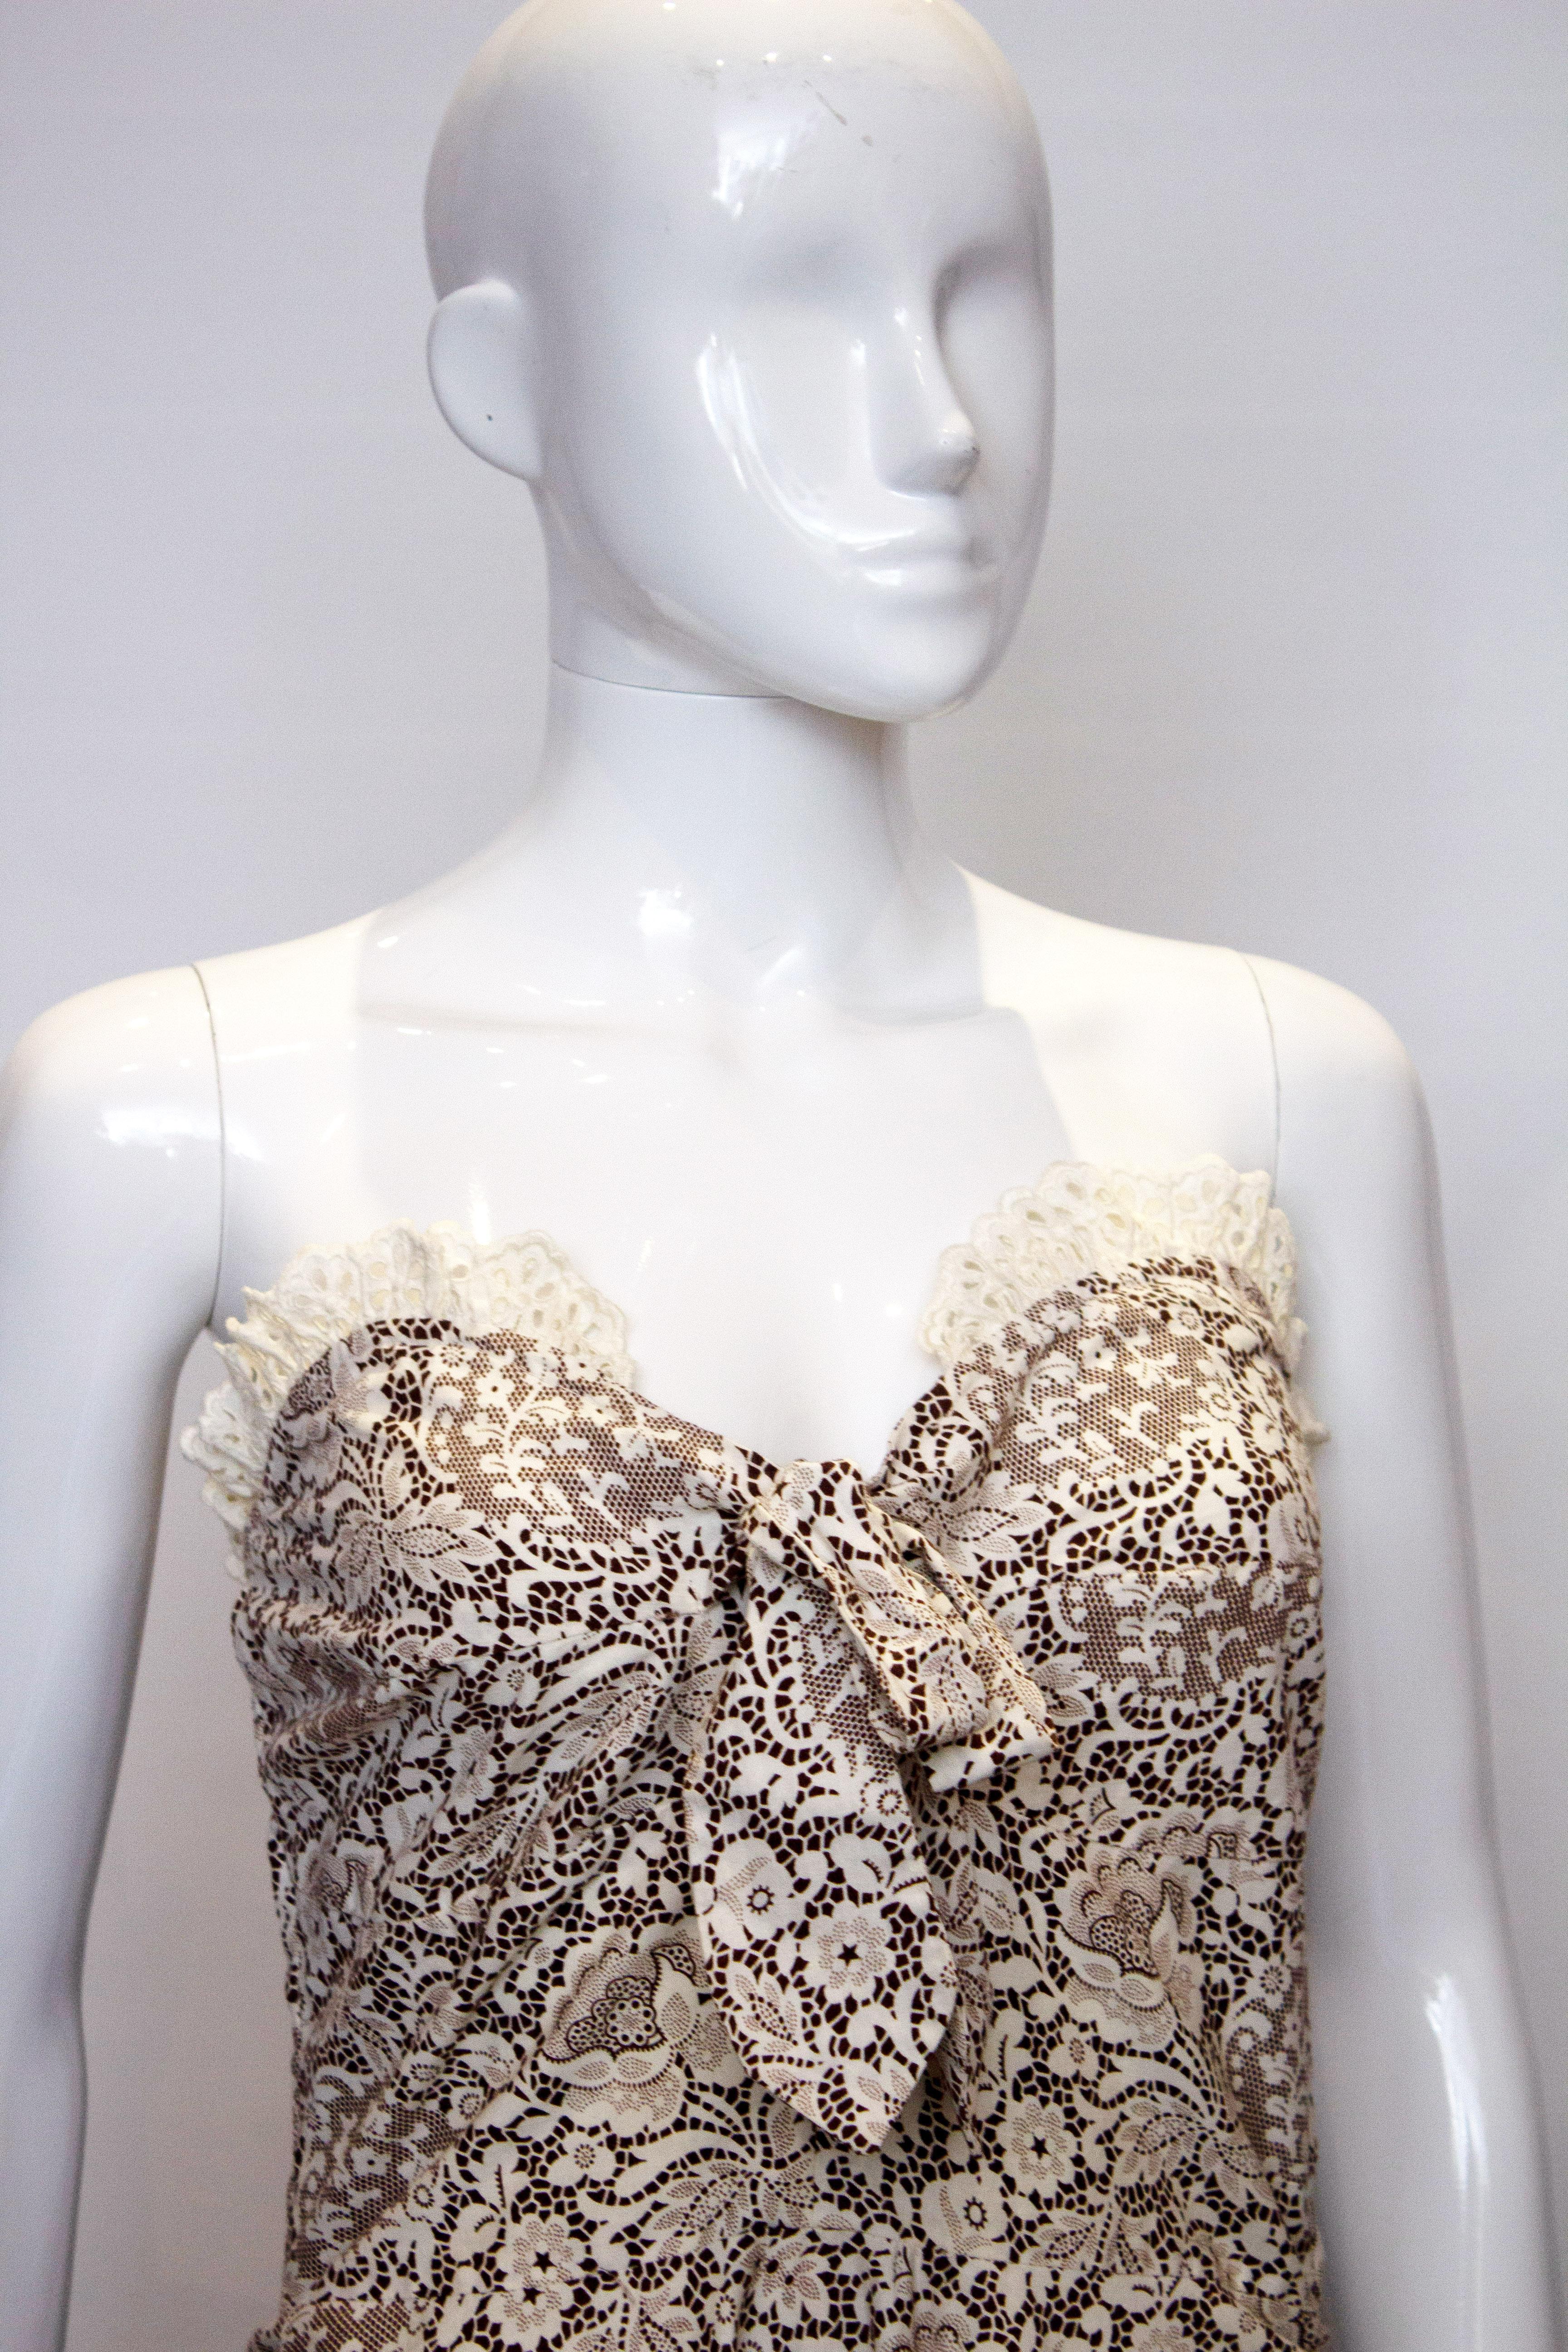 A fun vintage dress by Horrocks with a matching bolero. The dress is in  a brown and white print with a lace frill at the hem. The dress has a sweetheart neckline, boning in the bodice and a central back zip. The bolero has a shawl collar and